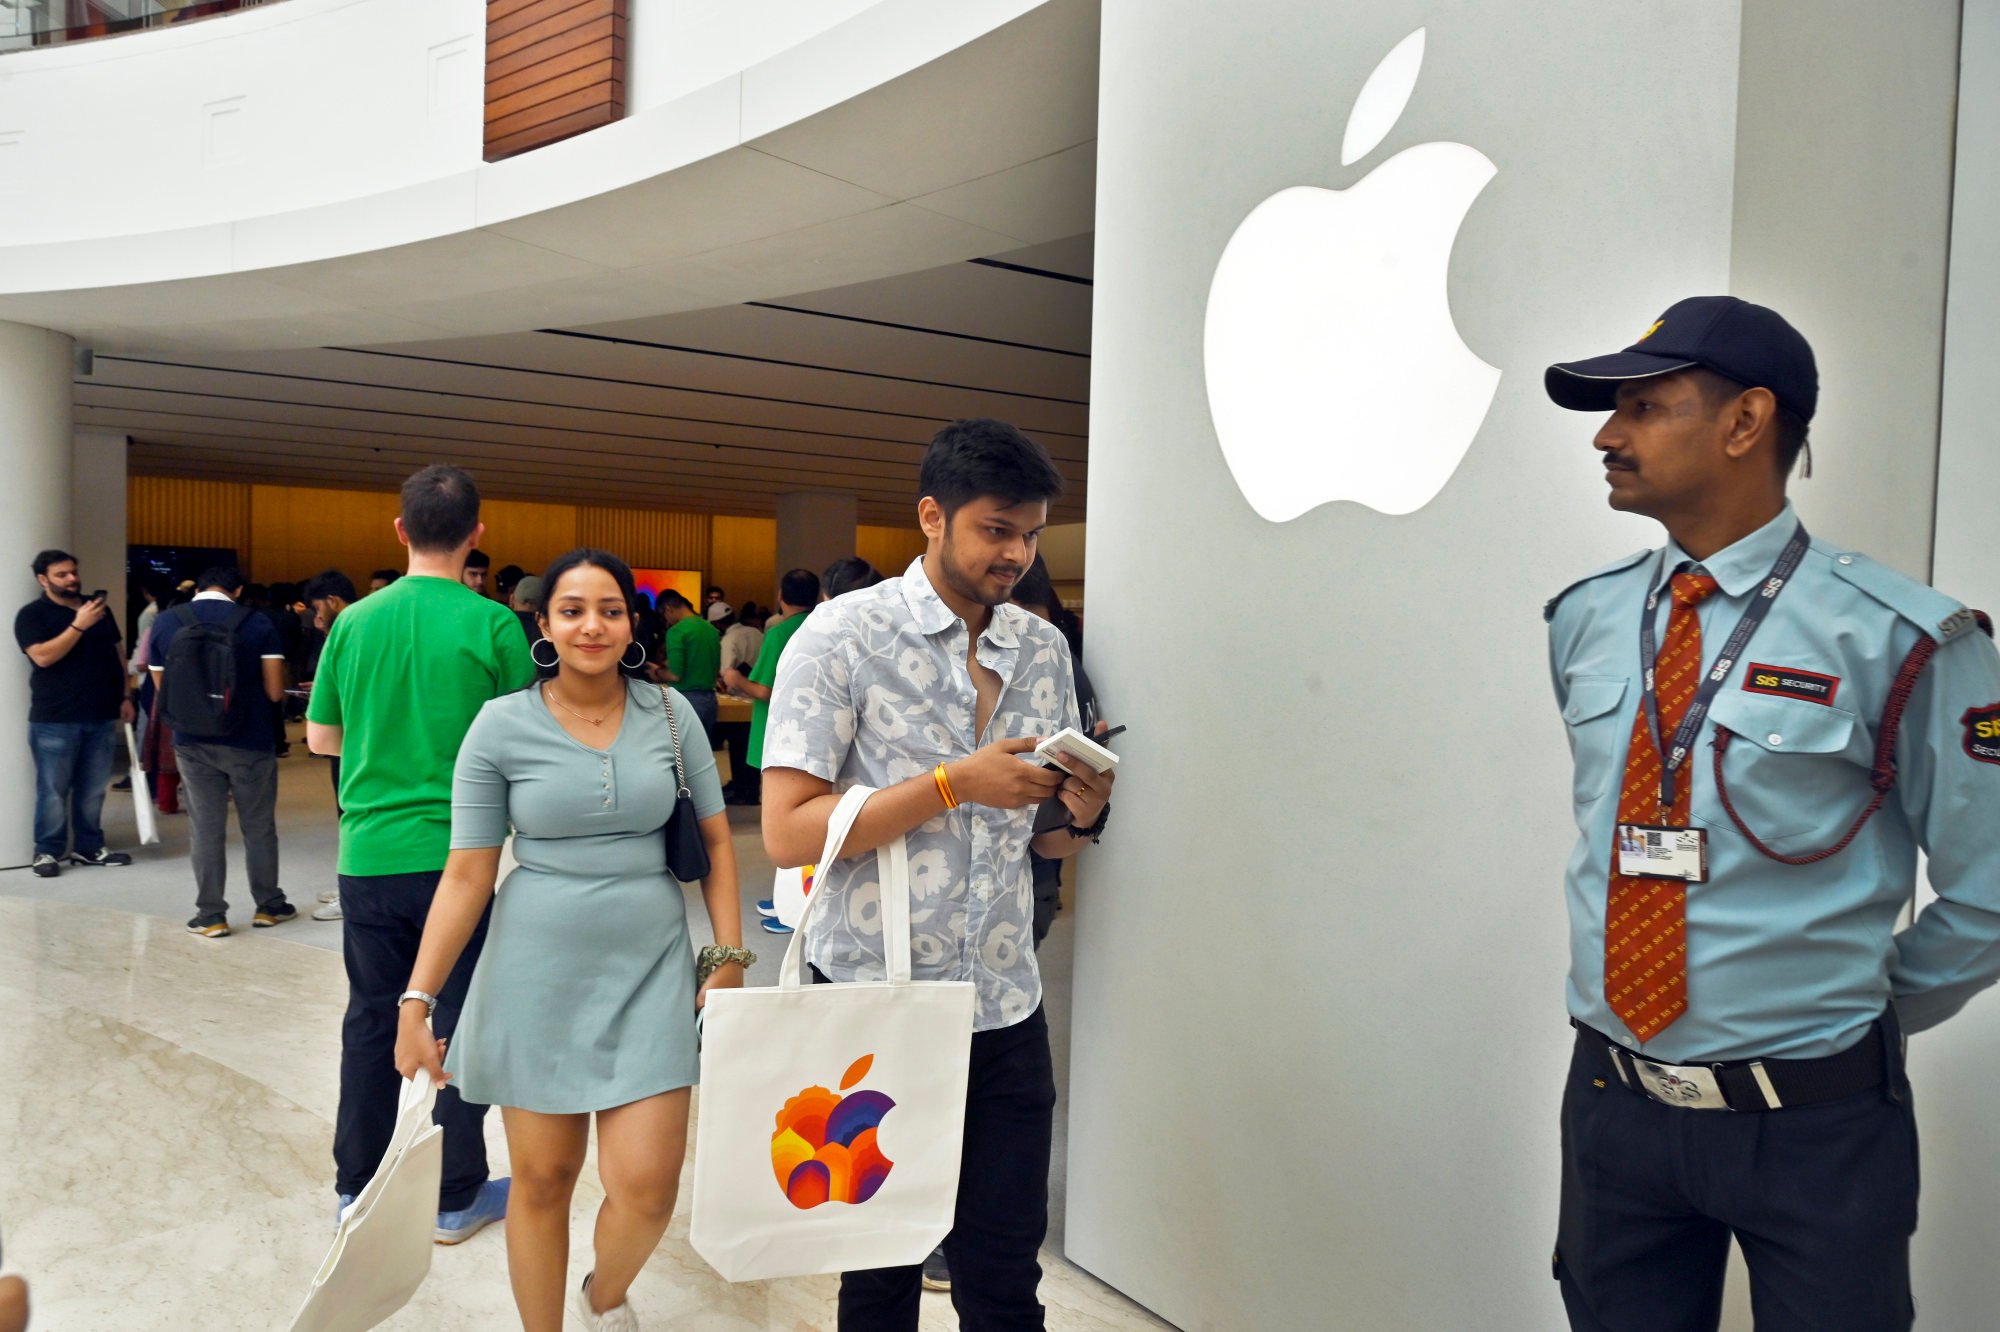 Customers visit India’s second Apple retail store, named ‘Apple Saket’, at a shopping centre in New Delhi last year. Investors expect India to surpass China in terms of number of consumers. Photo: Hindustan Times via Getty Images